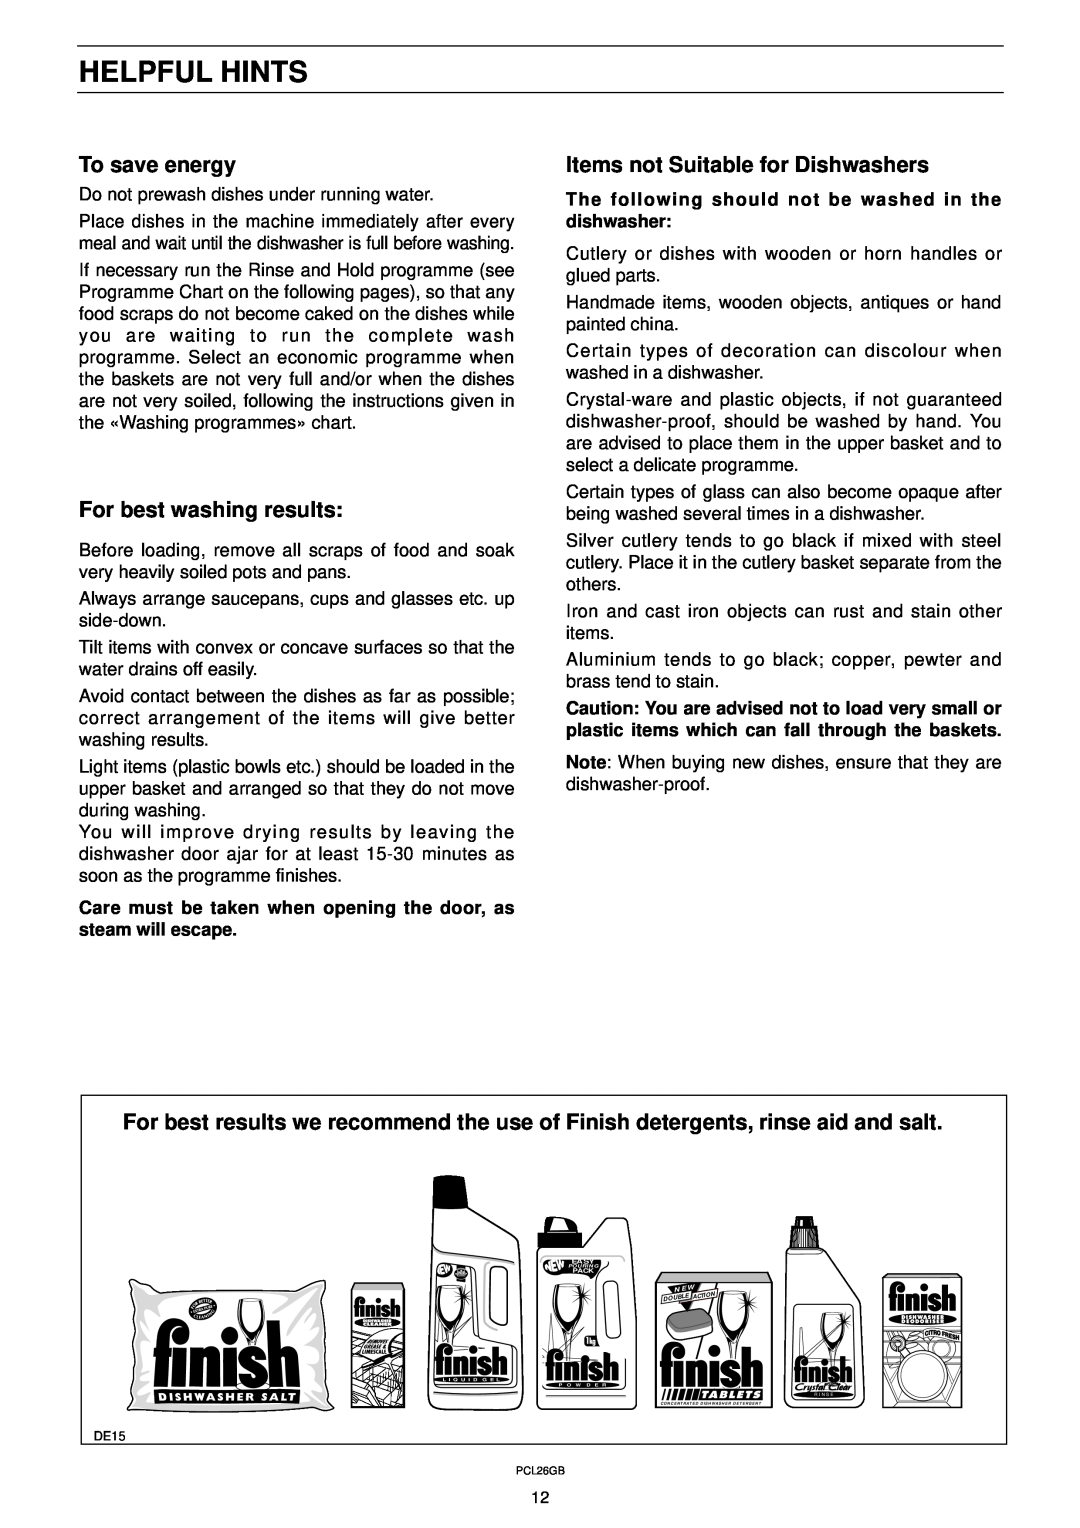 Zanussi DW 911 manual Helpful Hints, To save energy, For best washing results, Items not Suitable for Dishwashers 